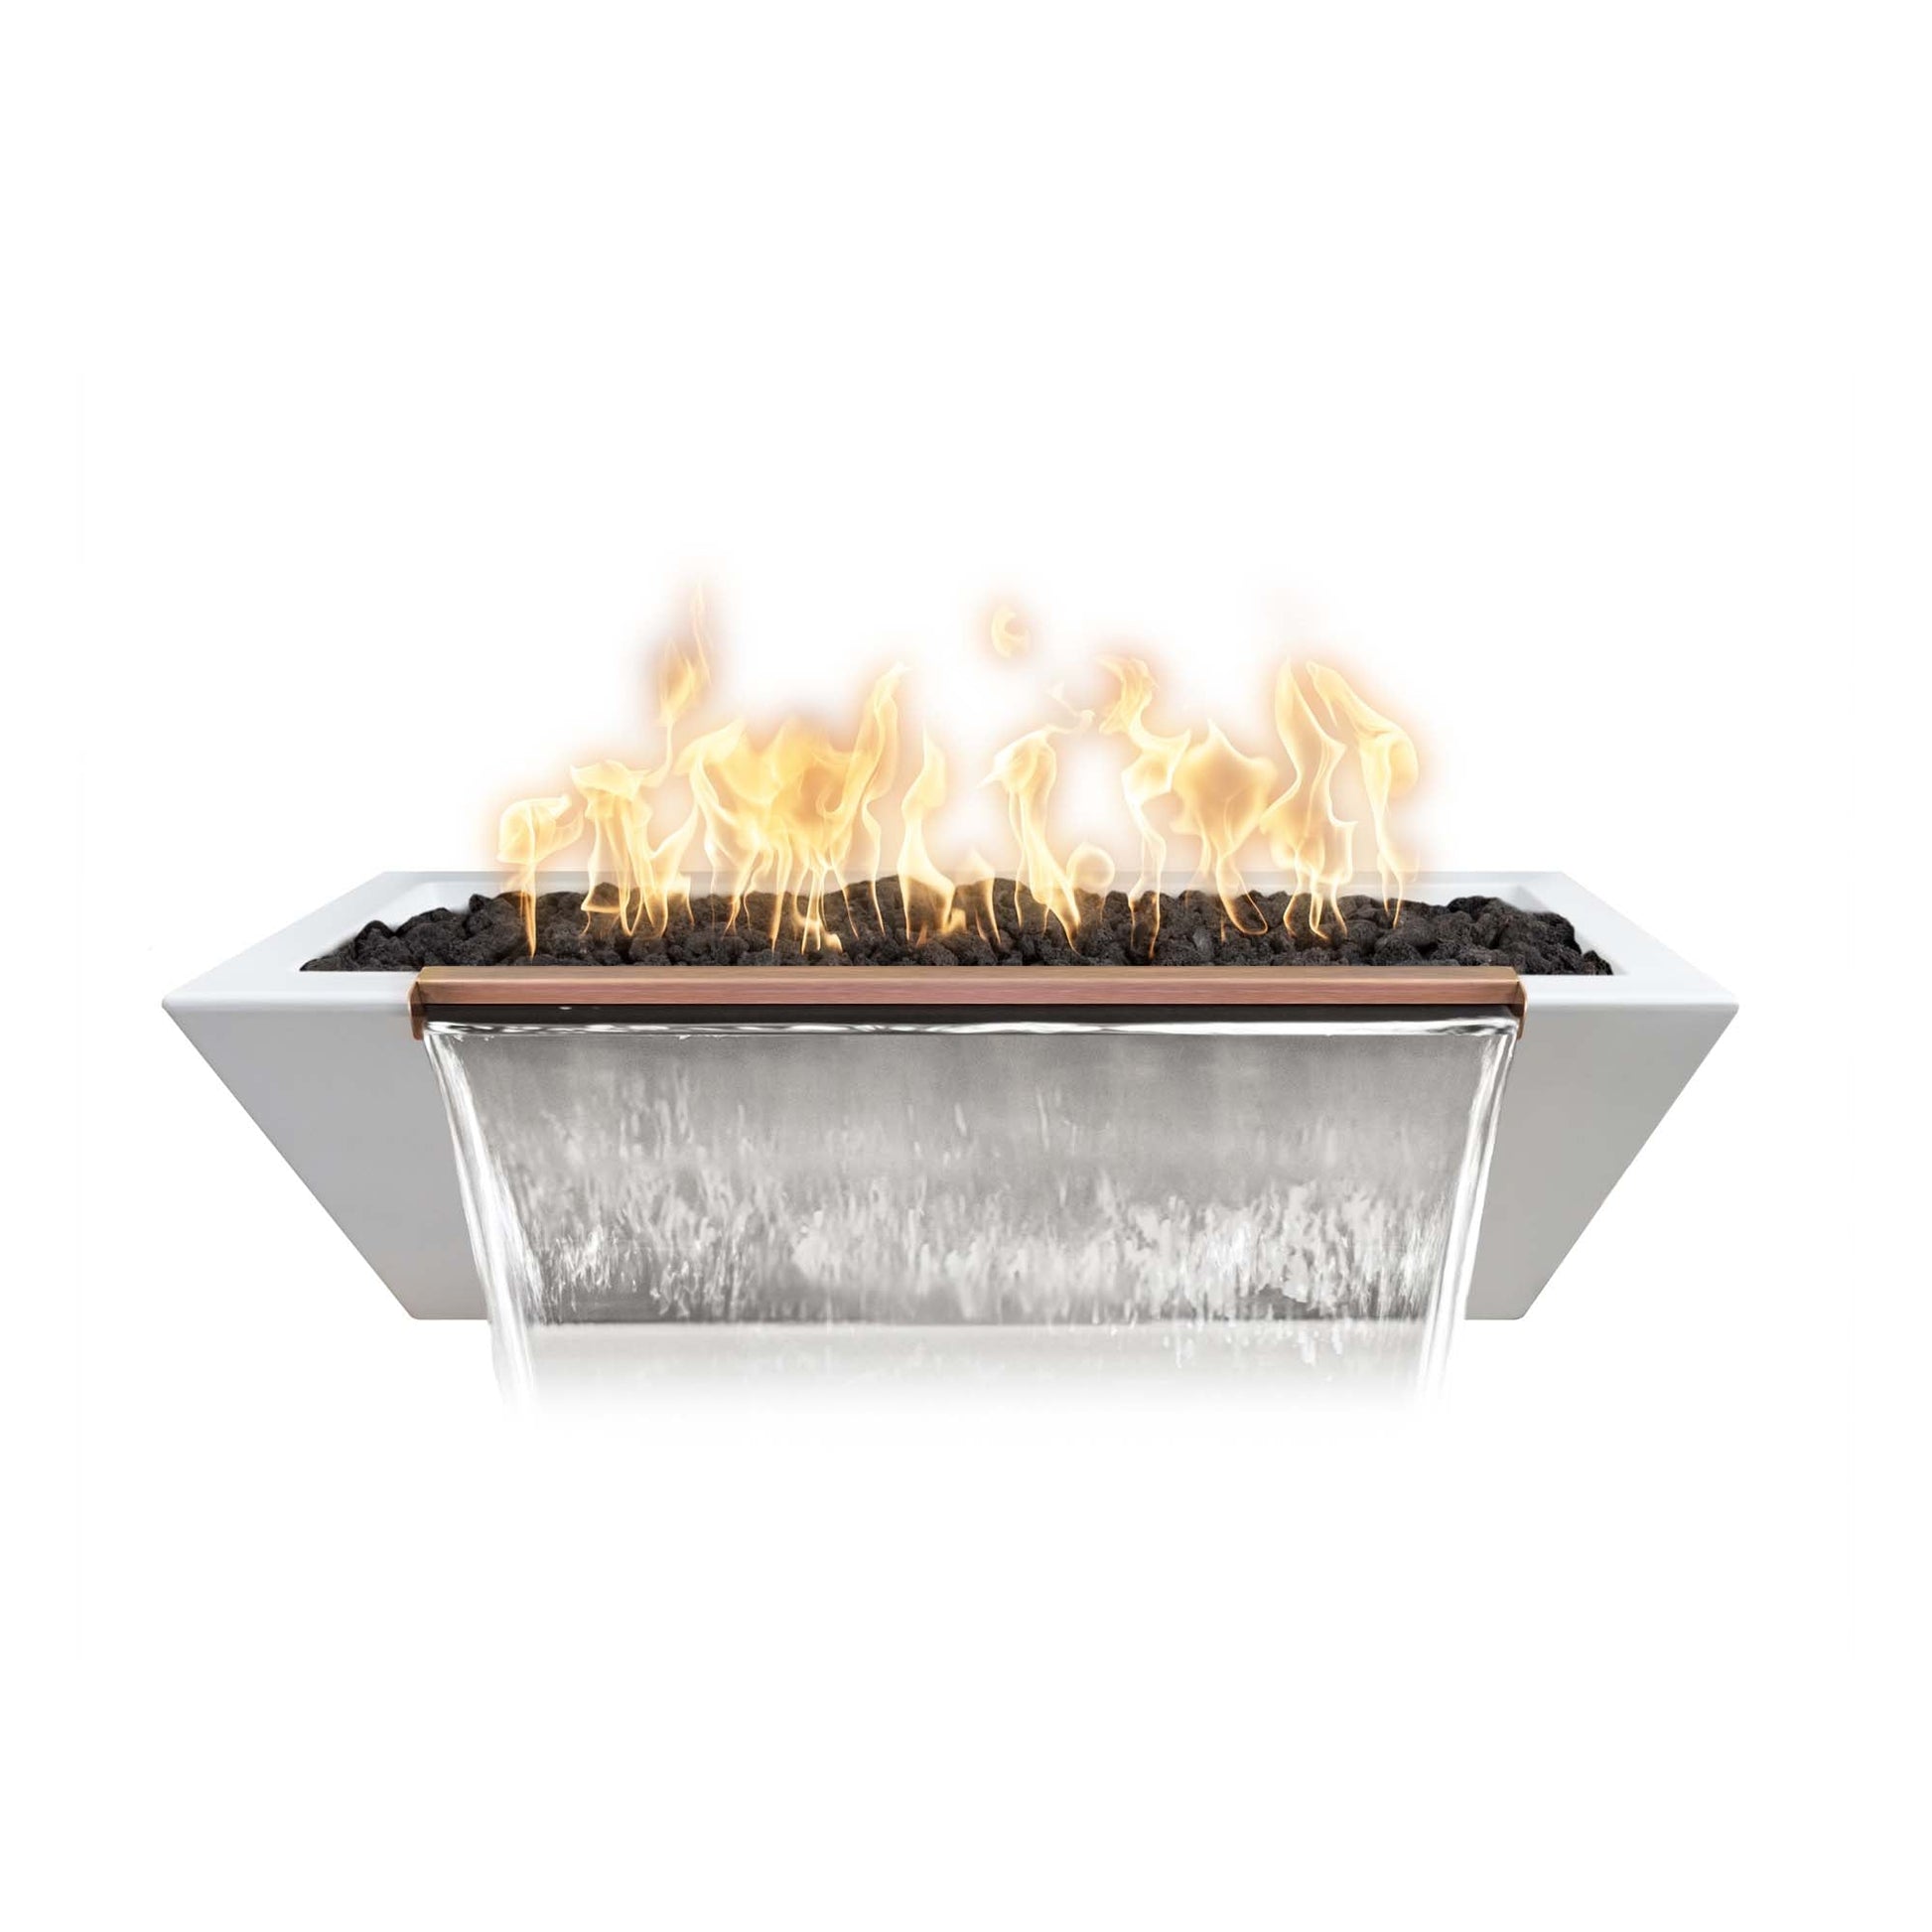 The Outdoor Plus Linear Maya 72" Chestnut GFRC Concrete Liquid Propane Fire & Water Bowl with Match Lit Ignition